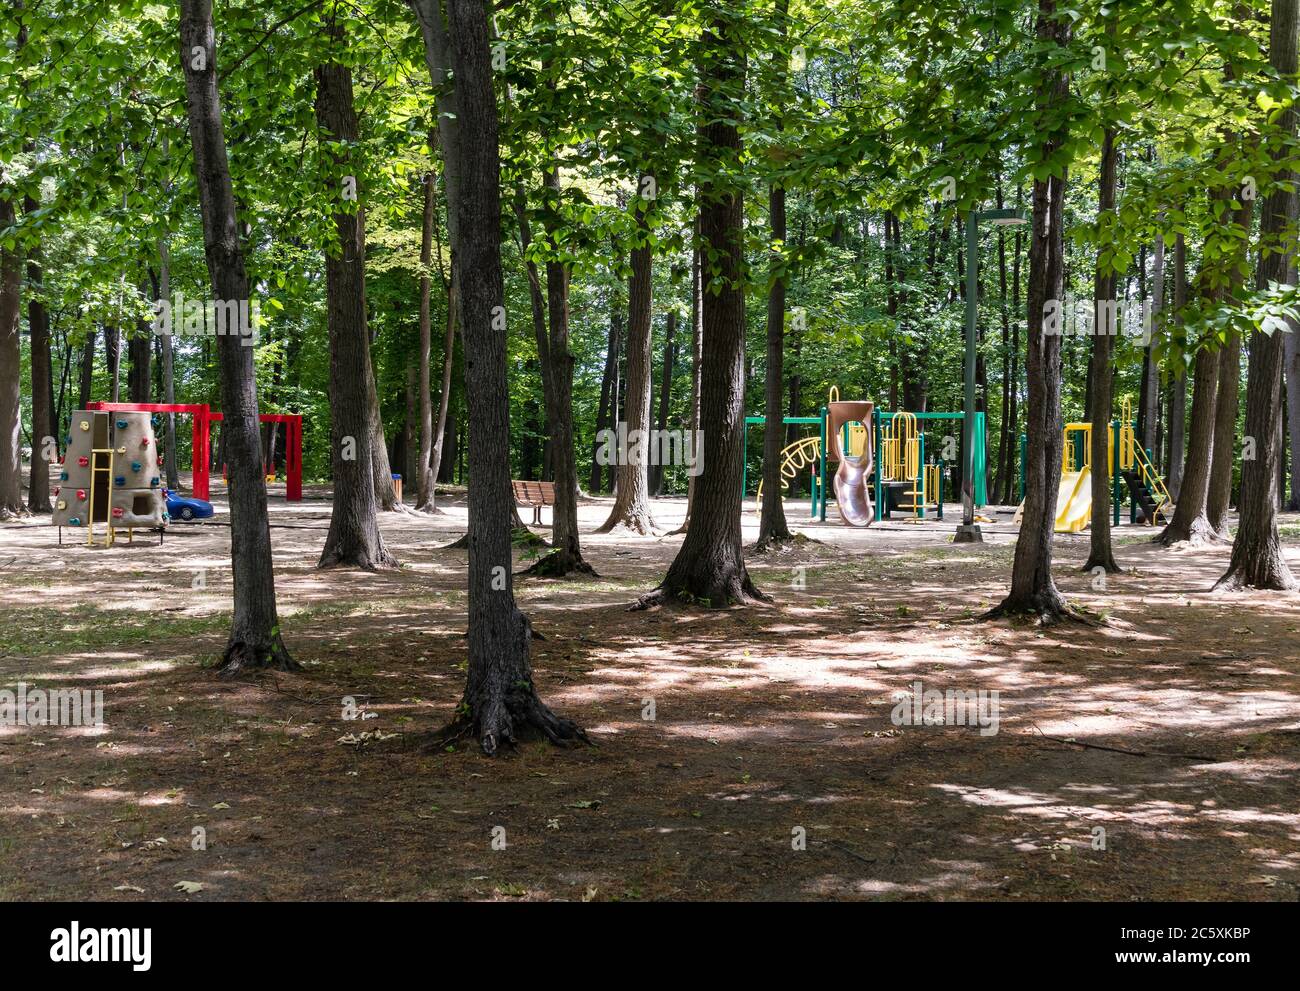 Playground park named Parc De Grandpre located at Sorel-Tracy city  in the province of Quebec in Canada country at summer Stock Photo